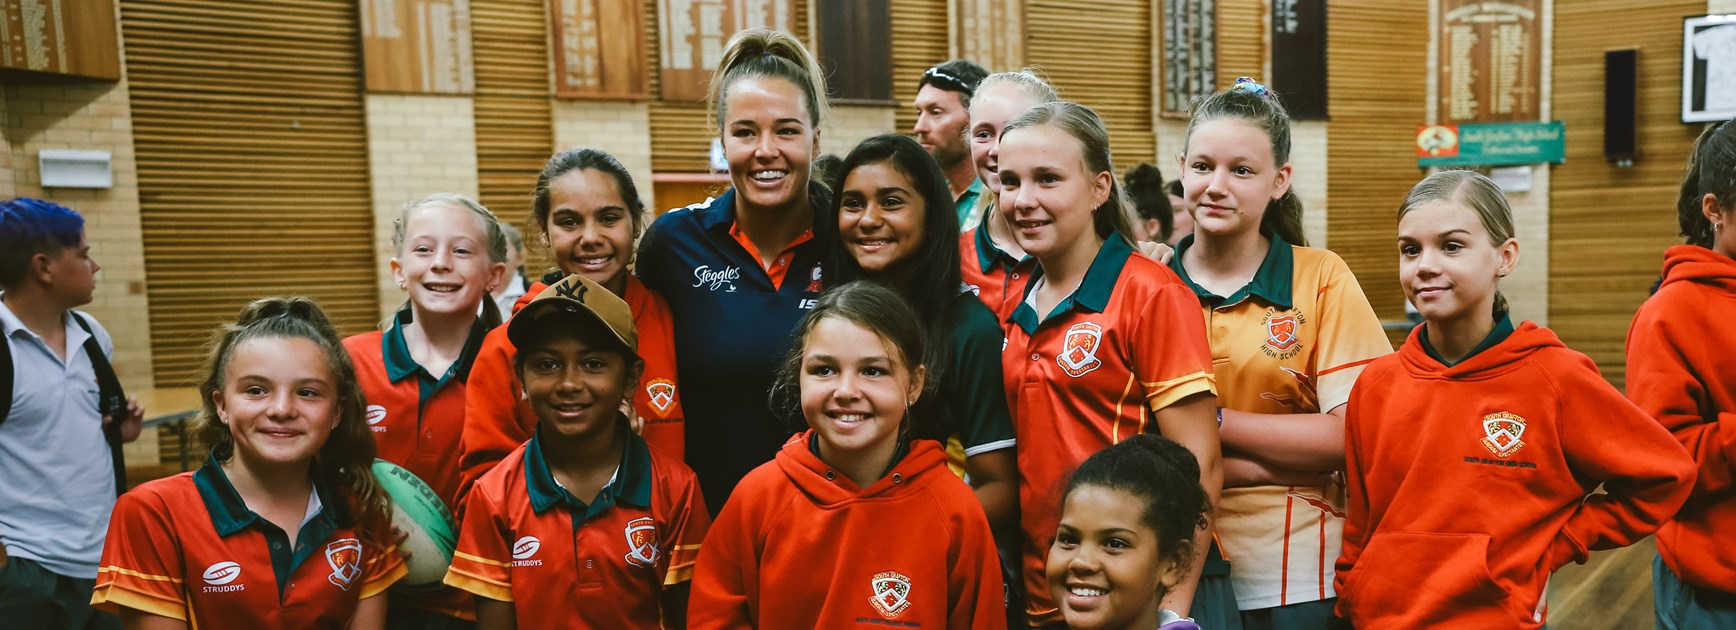 NRL introduces women's rugby league Community Award